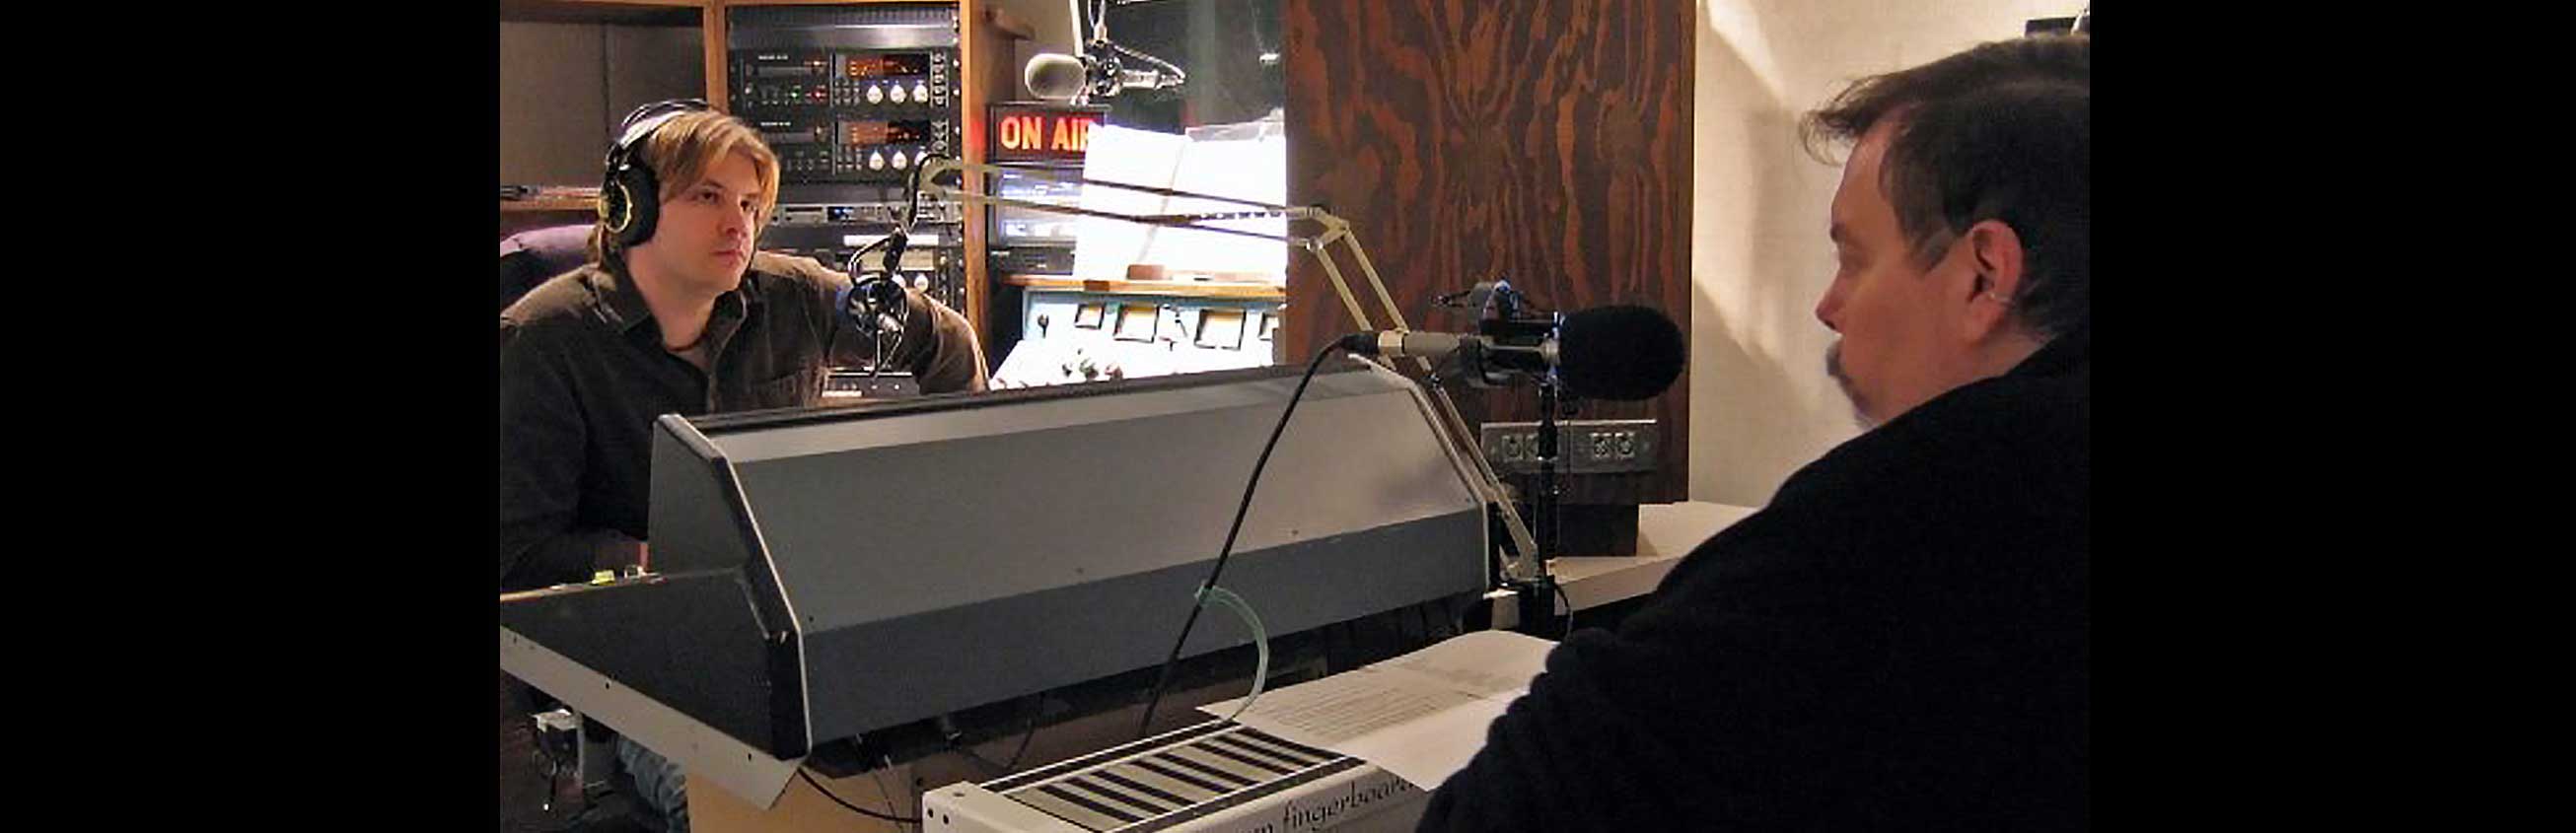 Richard on air with Treavor Hastings at WDFH, 2005.